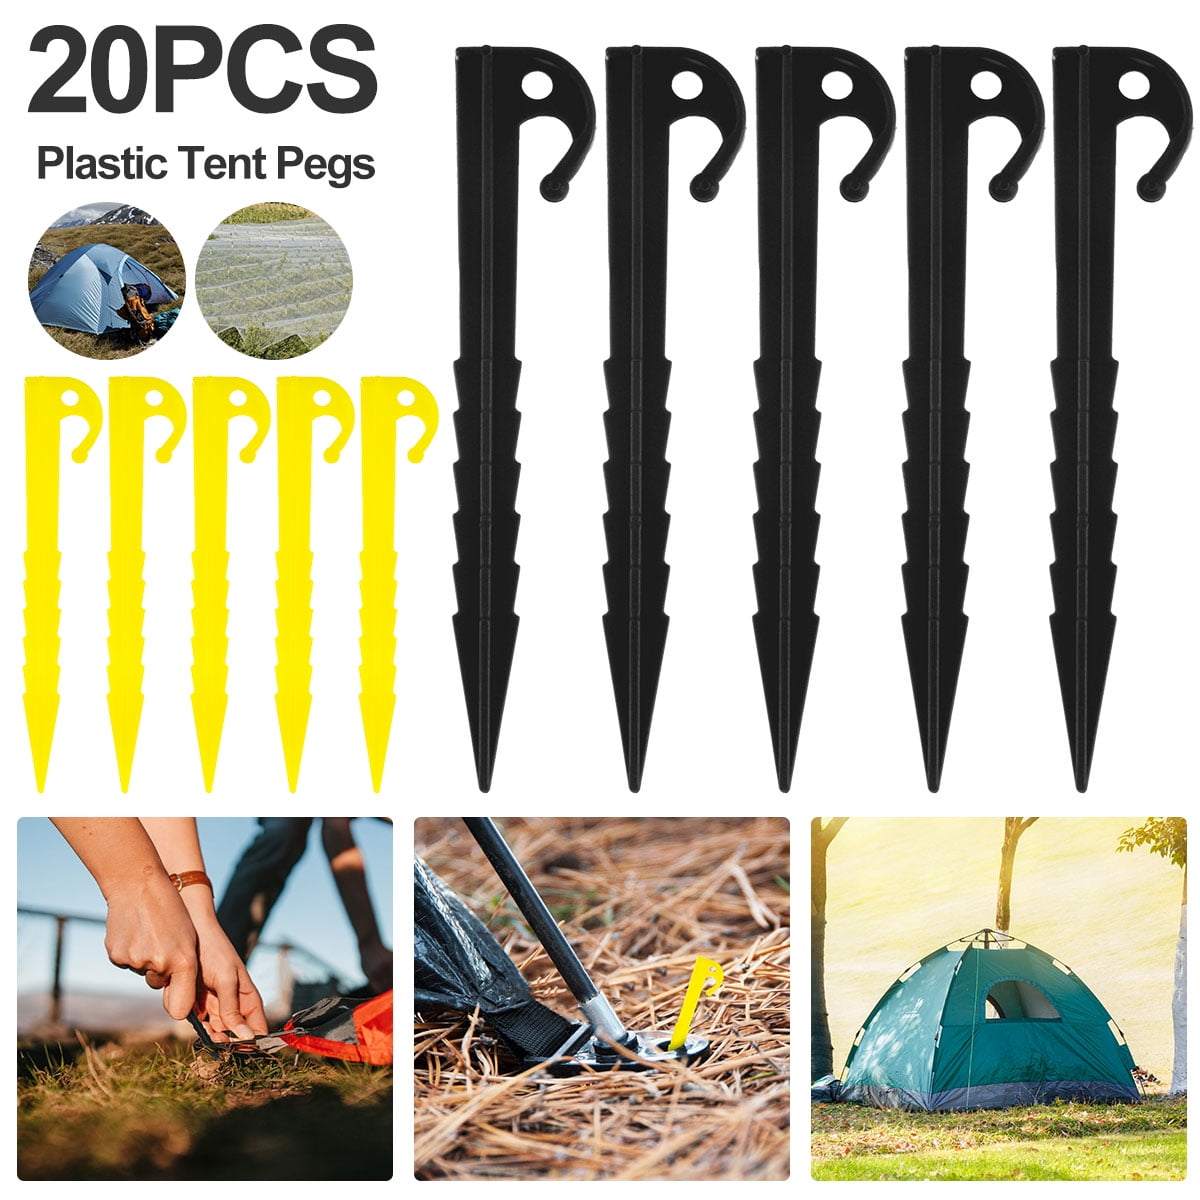 NEW 20PCS TENT GROUND HEAVY DUTY PEG GALVANISED METAL CAMPING GARDEN HOOK STAKE 